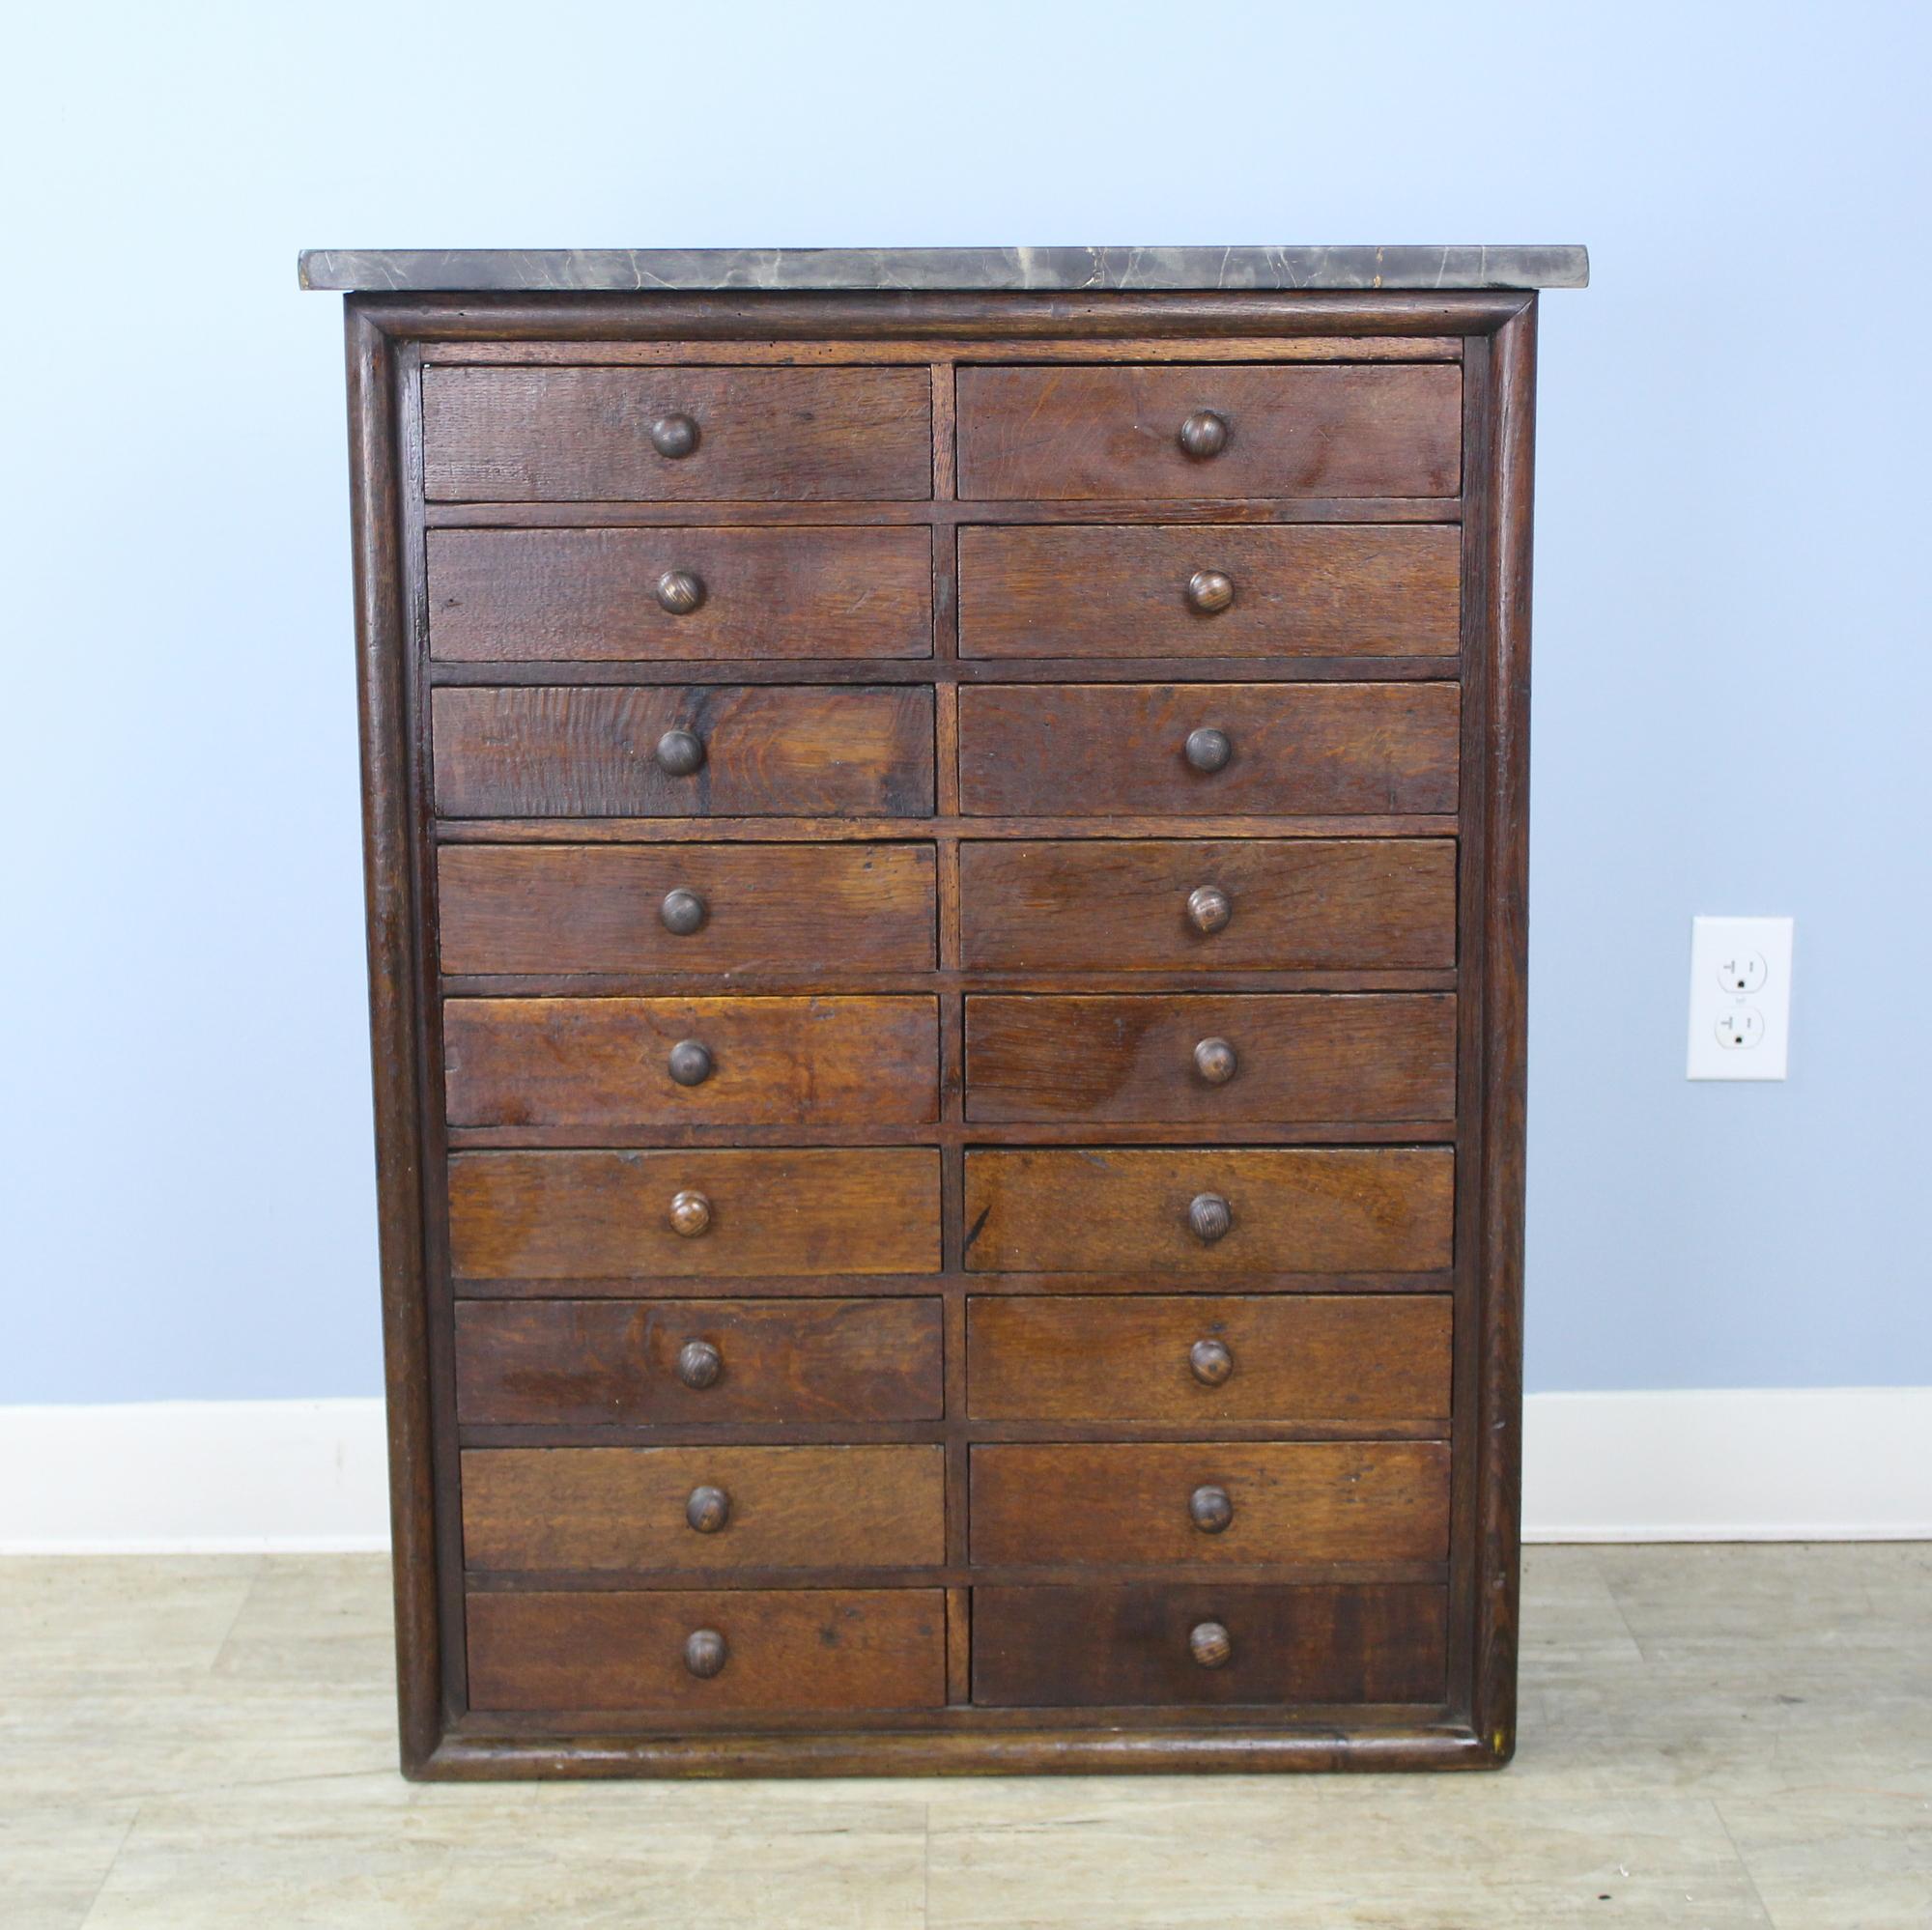 A handsome bank of drawers in dark brown oak. Marble top is dramatically grained and vibrant, with a small area of repair and some scratches. Each of the eighteen drawers is roomy and slides easily. There are no stoppers so the drawers are